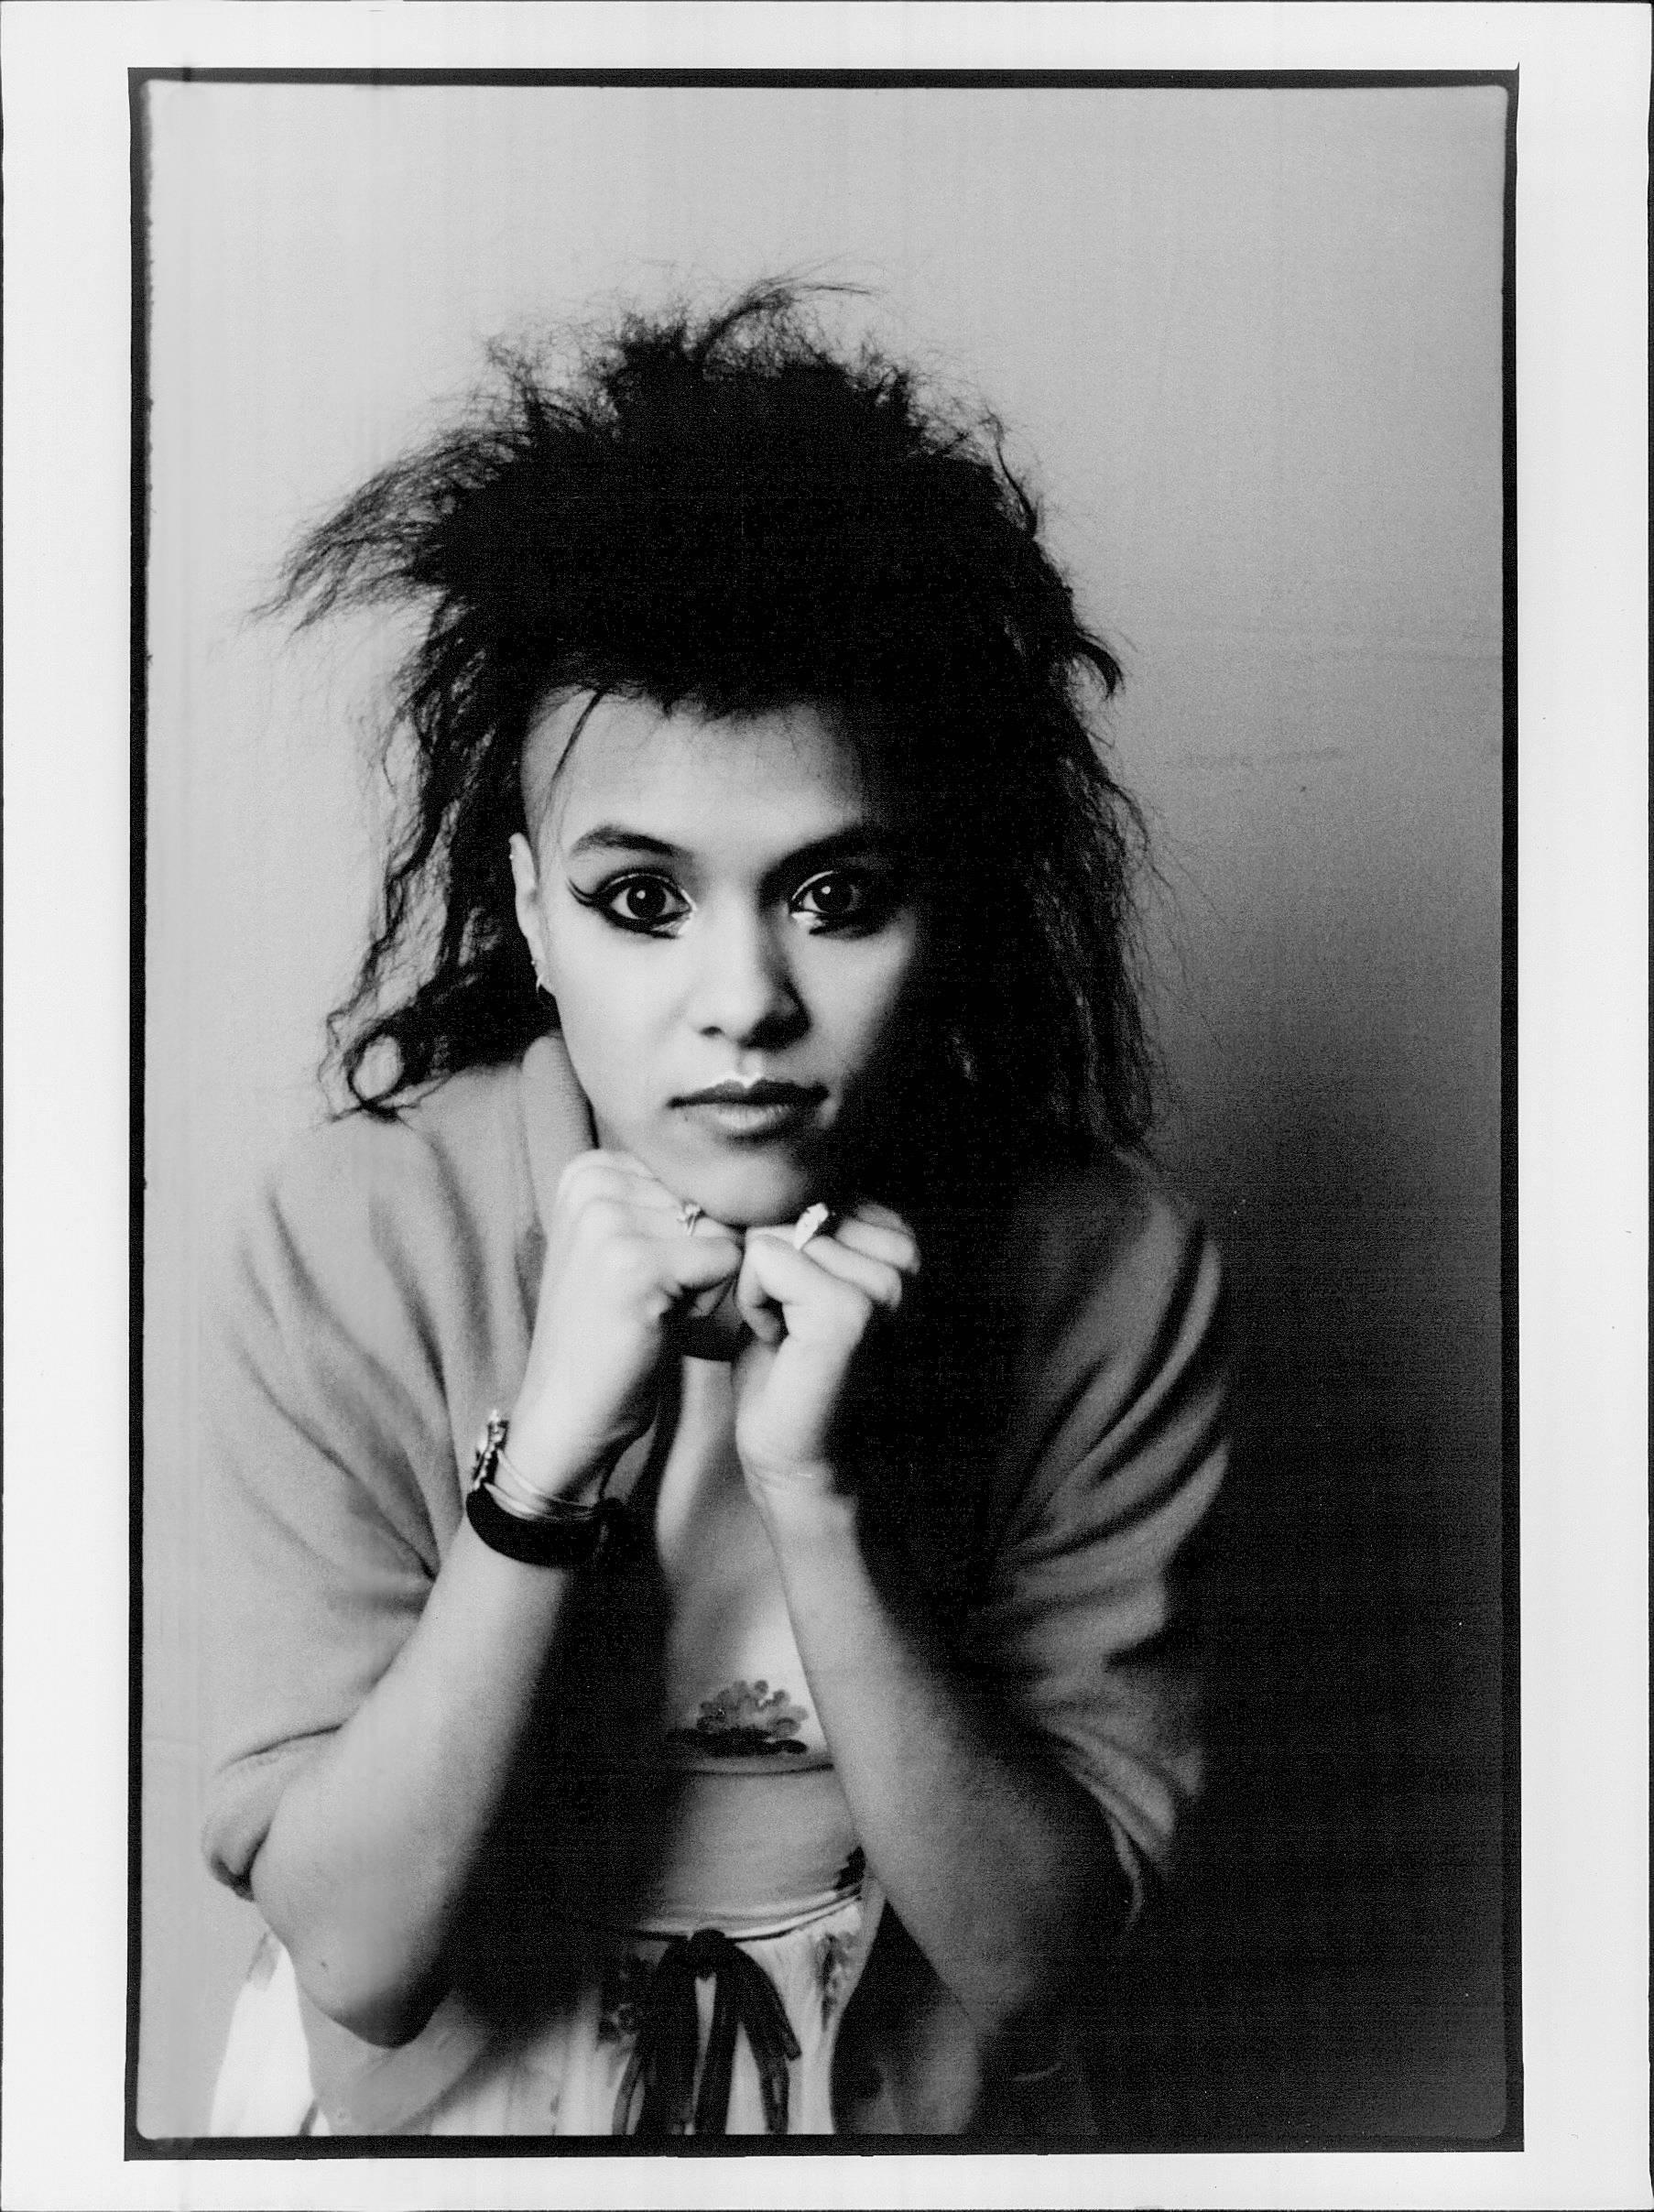 Unknown Black and White Photograph - Annabella Lwin Chin in Hands Vintage Original Photograph